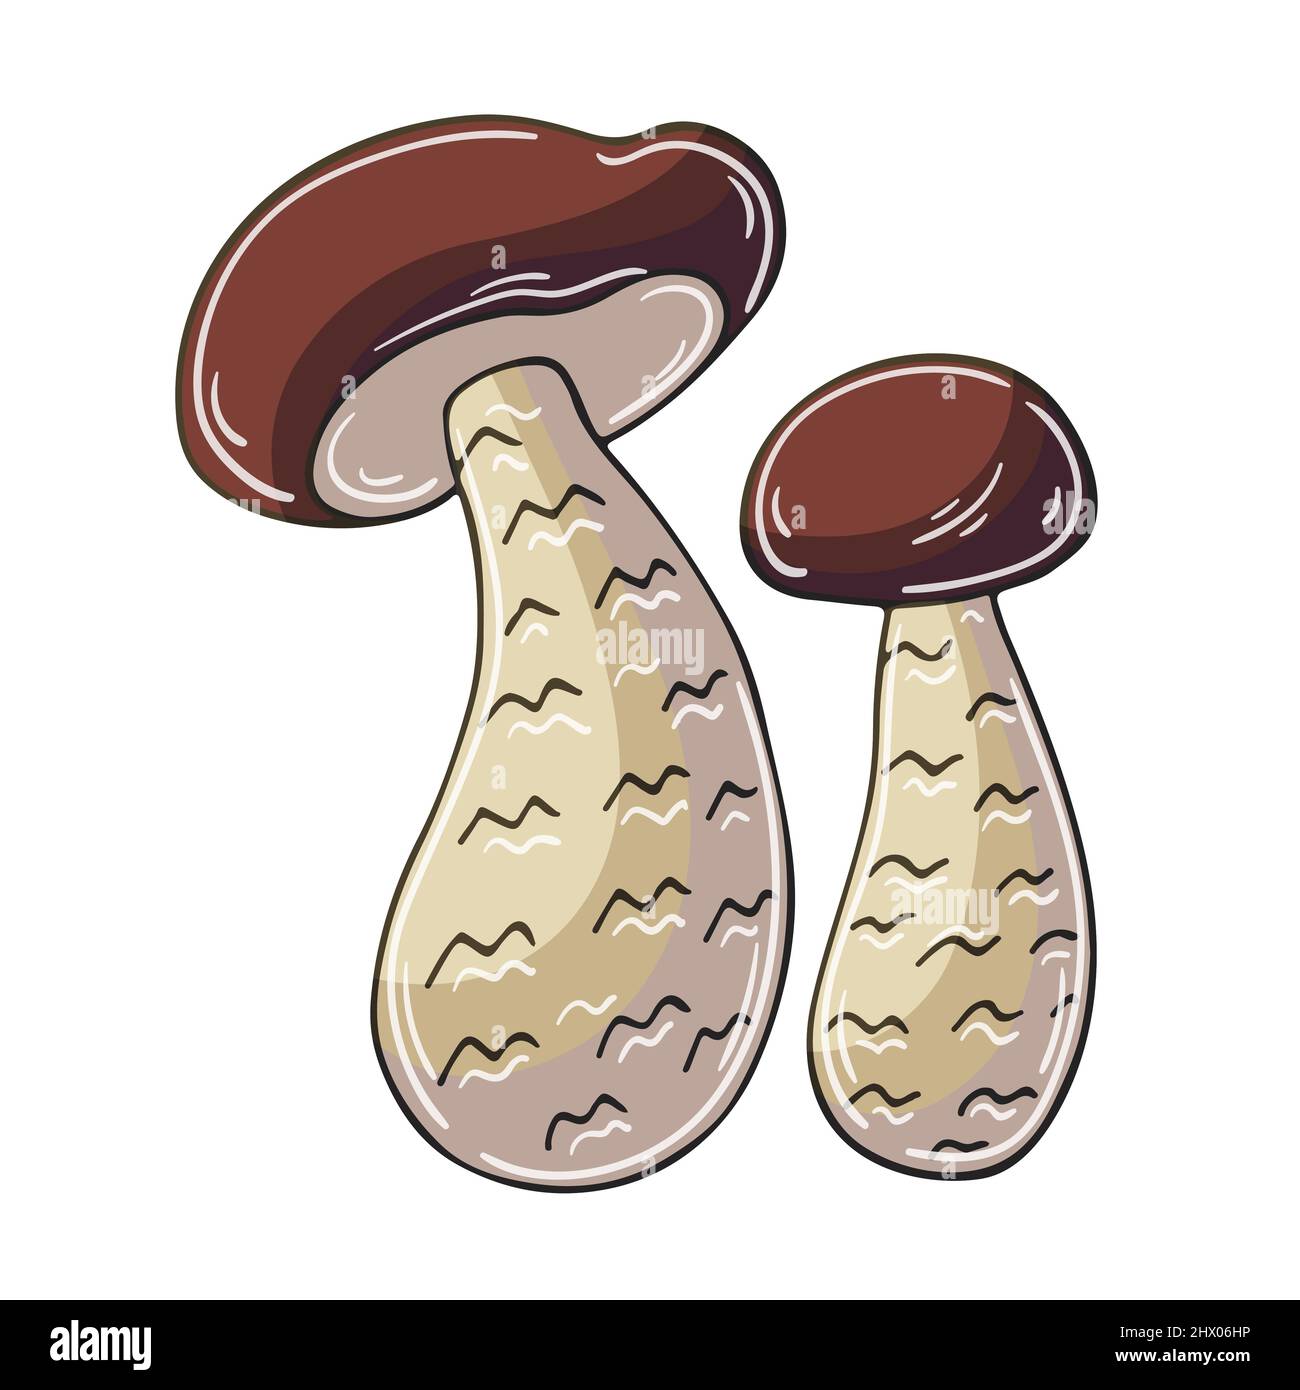 Cortinarius esculentus. Small set of hand drawn style vector illustrations. Children's drawings, autumn. Collection of icons, signs, pins, stickers Stock Vector